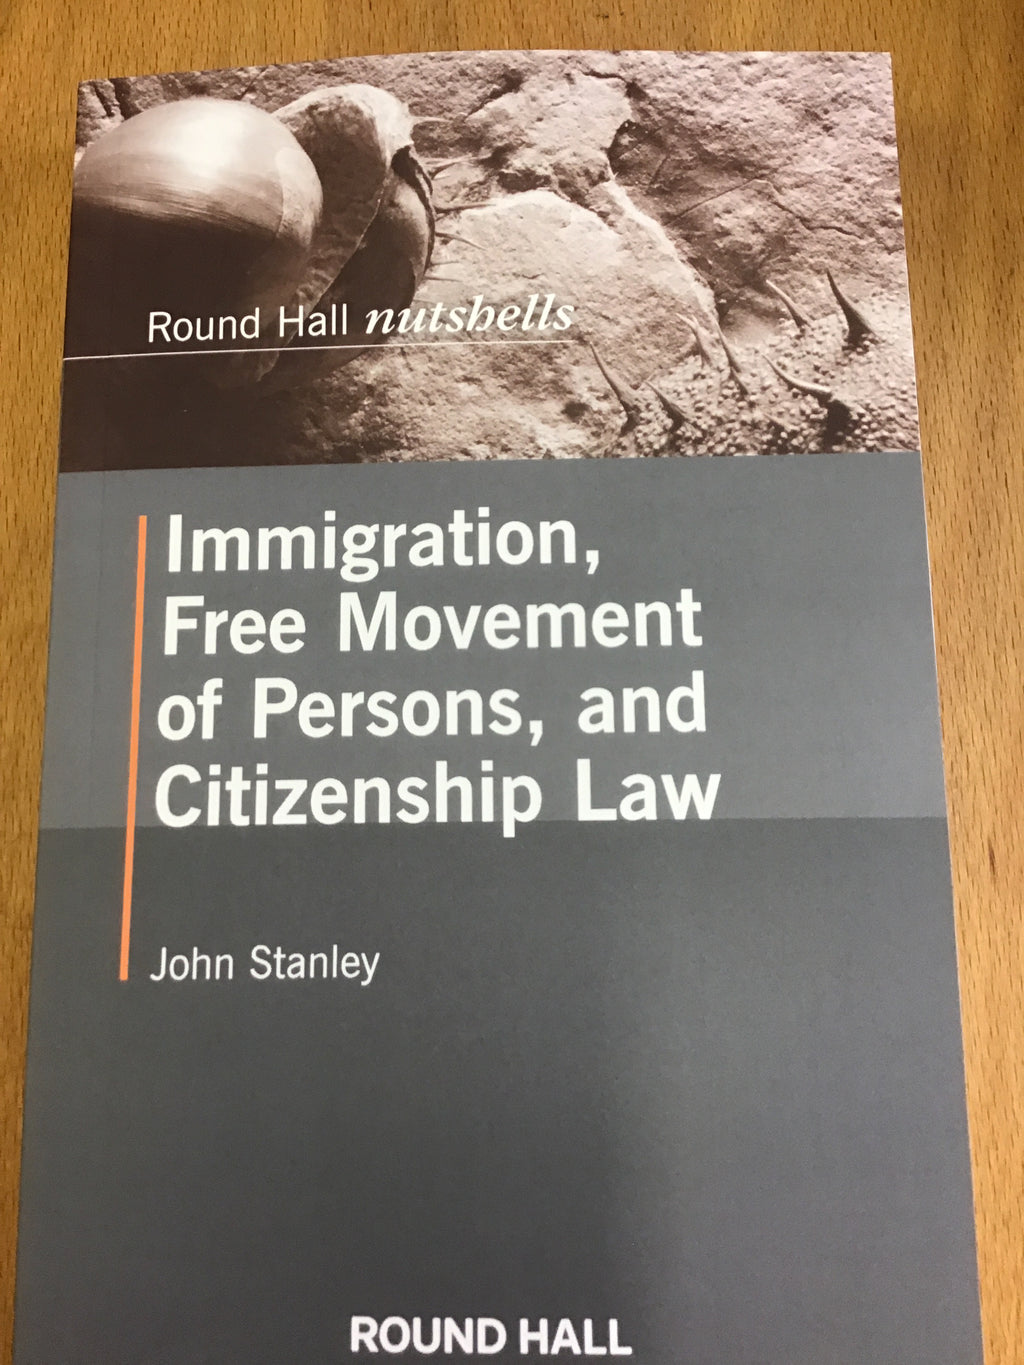 Movement　Legal　Immigration　General　Persons,　–　and　Free　Law　Nutshell　of　Citizenship